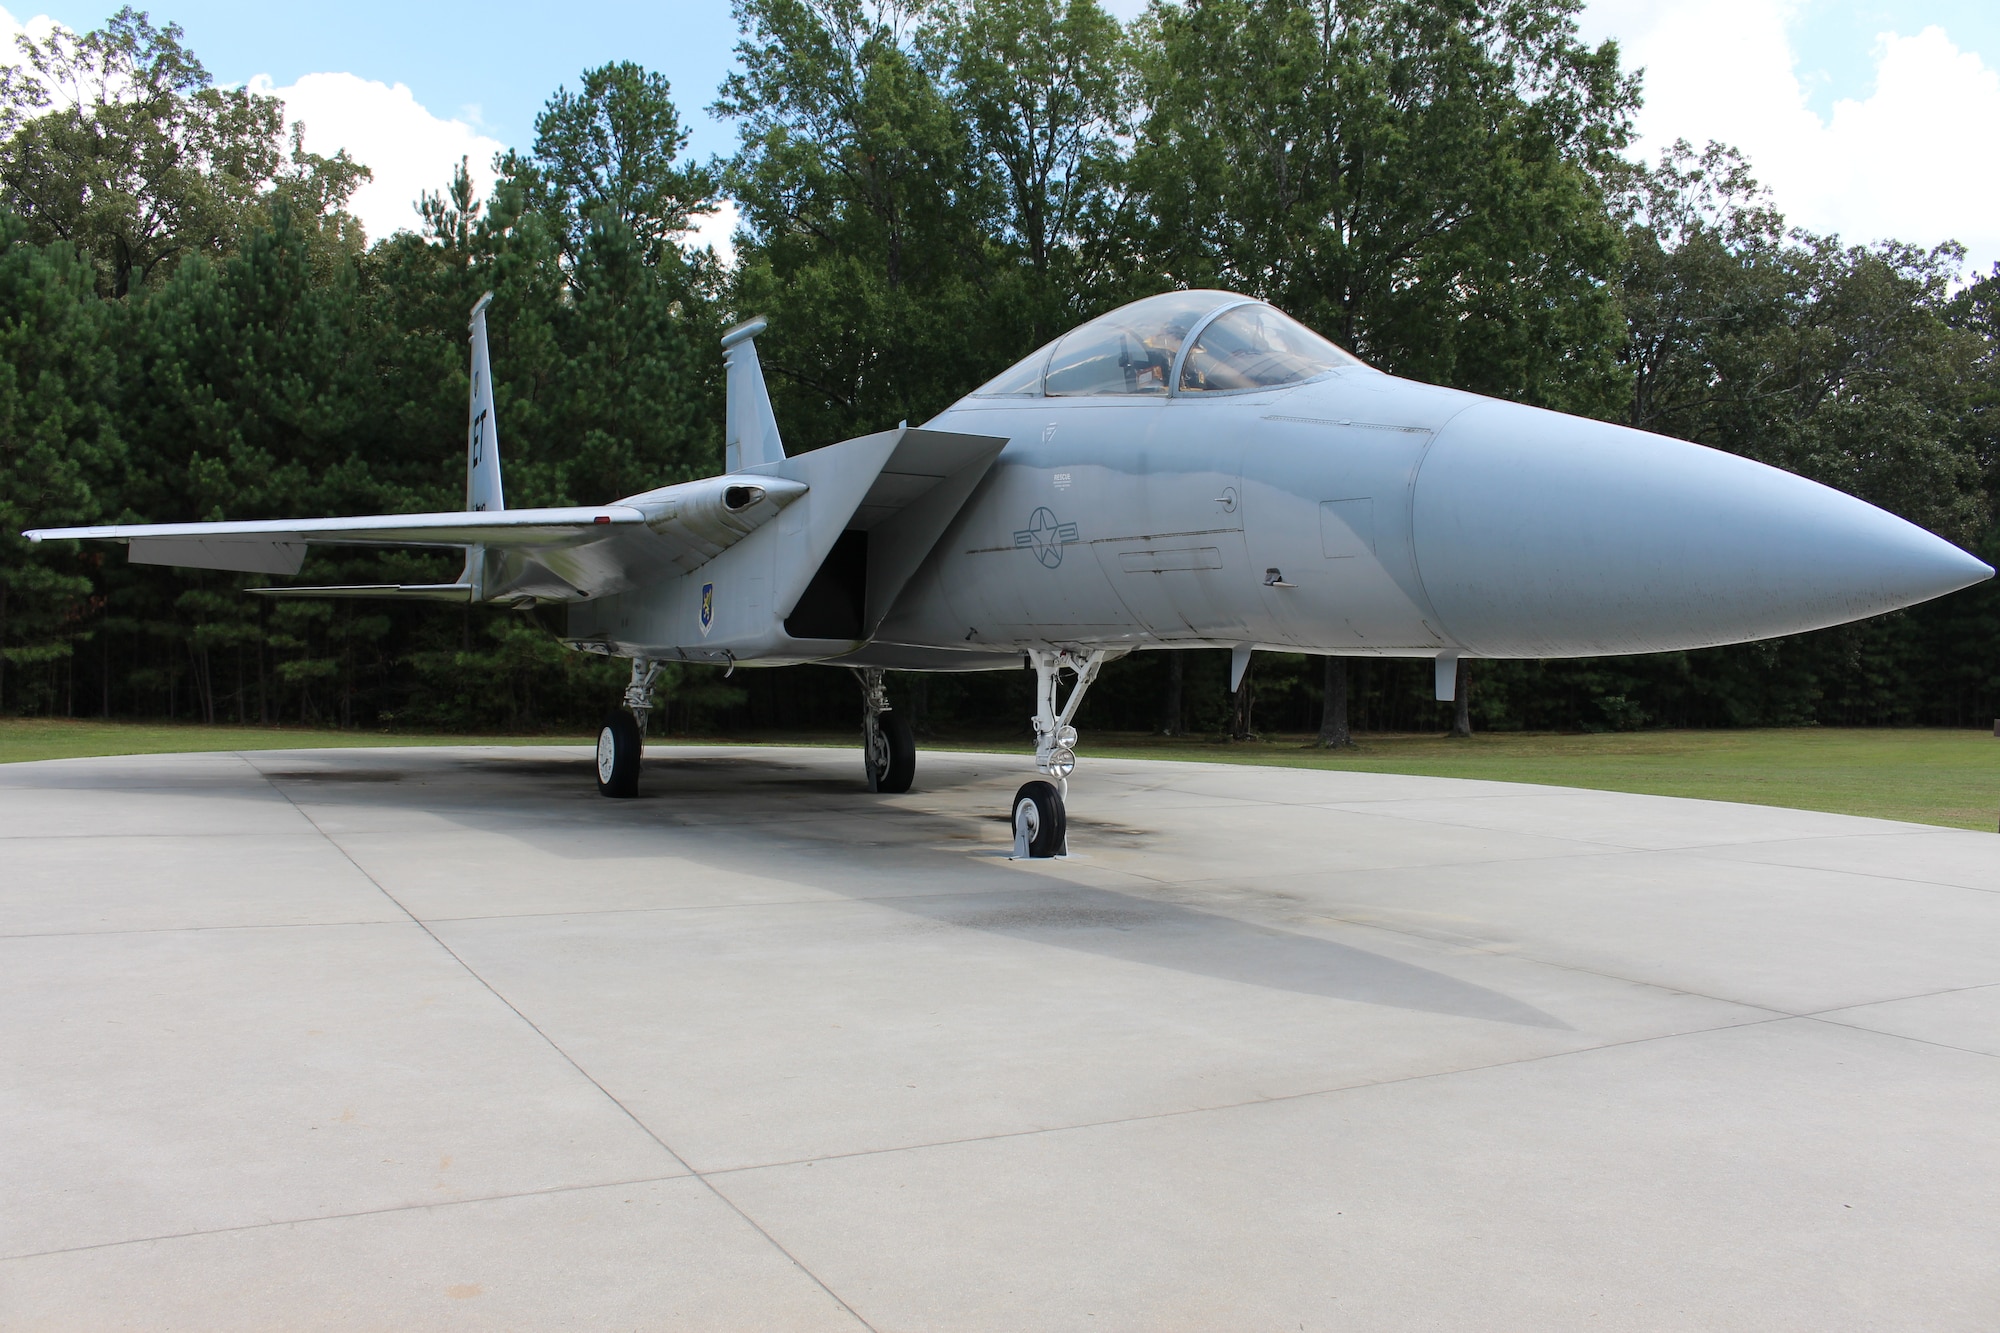 The static F-15 Eagle on display outside the Main Gate at Arnold Air Force Base, Tenn., is dedicated to Maj. Jim Duricy. He died April 30, 2002, when he was forced to eject at a high speed as the F-15C he piloted crashed into the Gulf of Mexico. His body was never found. A 12-year test pilot, Duricy was assigned to the 40th Flight Test Squadron based at Eglin Air Force Base, Fla., at the time of his death. He was on a captive flight development test of a new missile when the aircraft crashed. (U.S. Air Force photo by Kali Bradford)